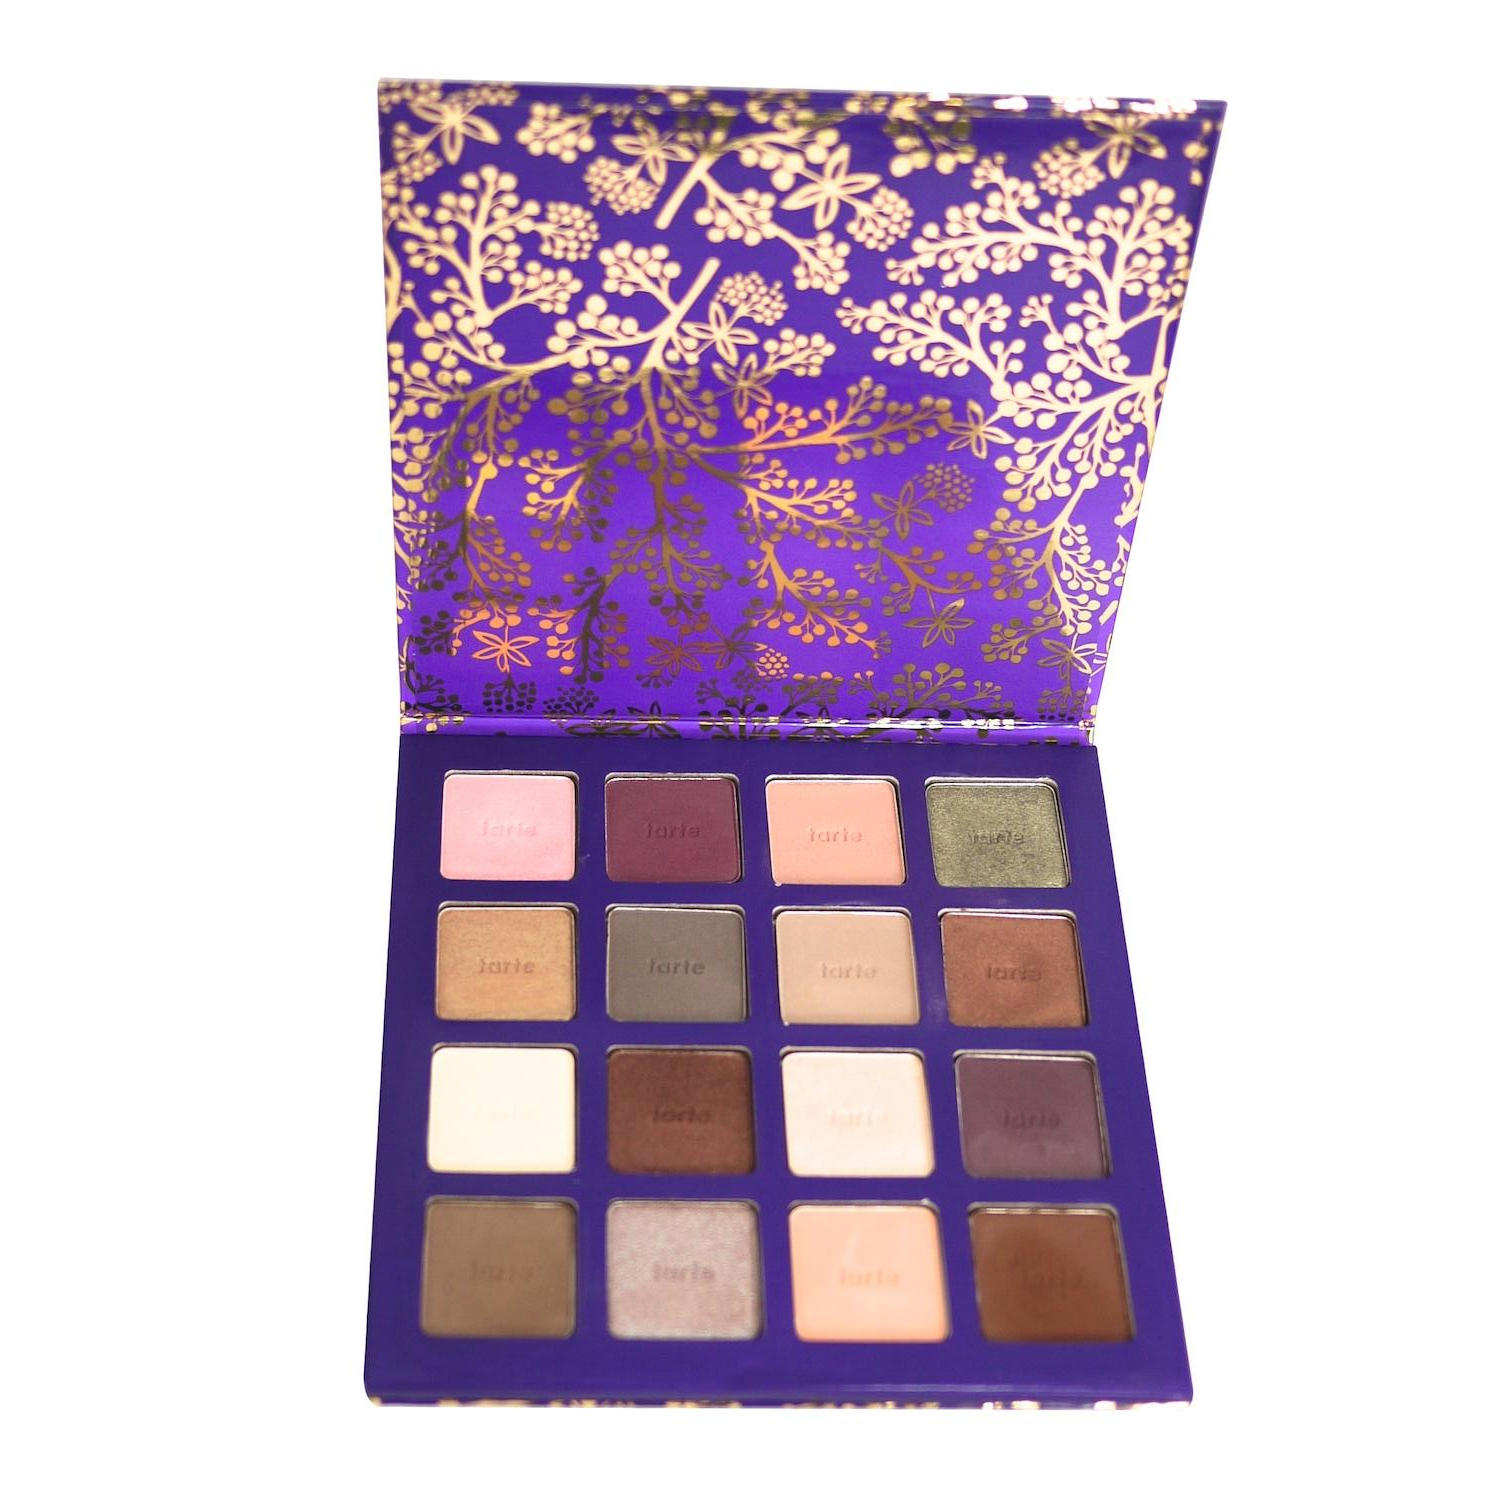 2nd Chance Tarte 16 Color Amazonian Clay Eyeshadow Palette